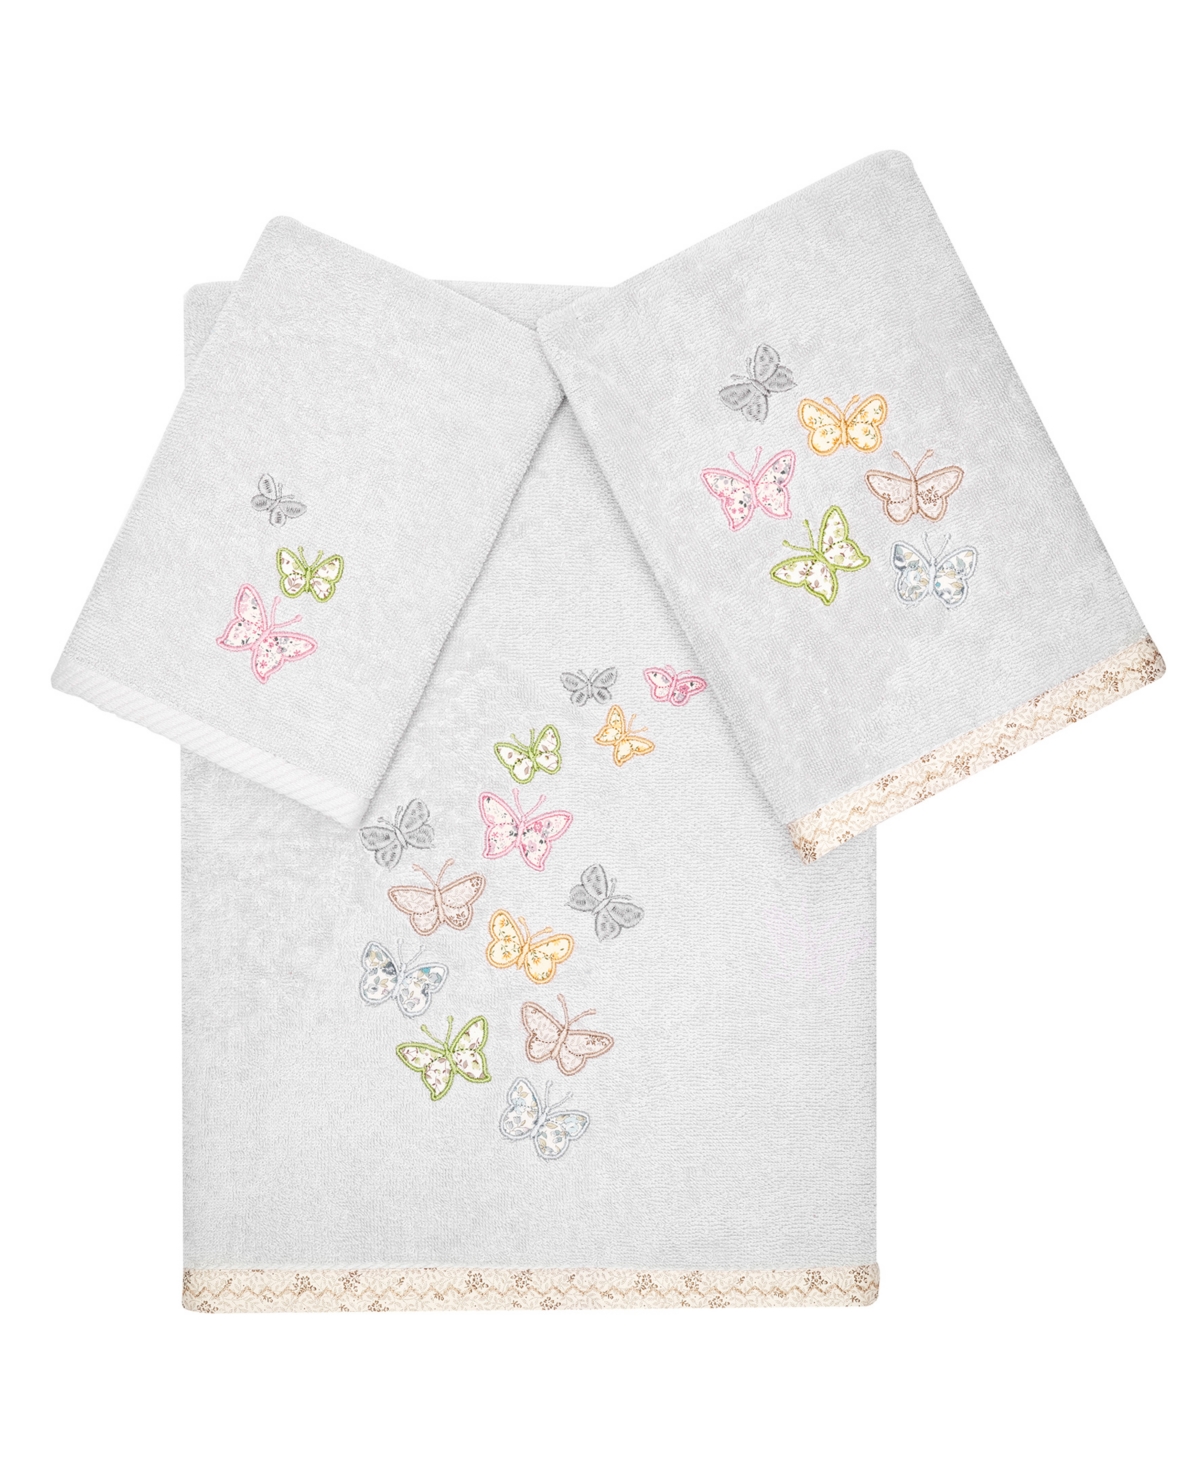 Linum Home Textiles Turkish Cotton Mariposa Embellished Towel Set, 3 Piece In Silver